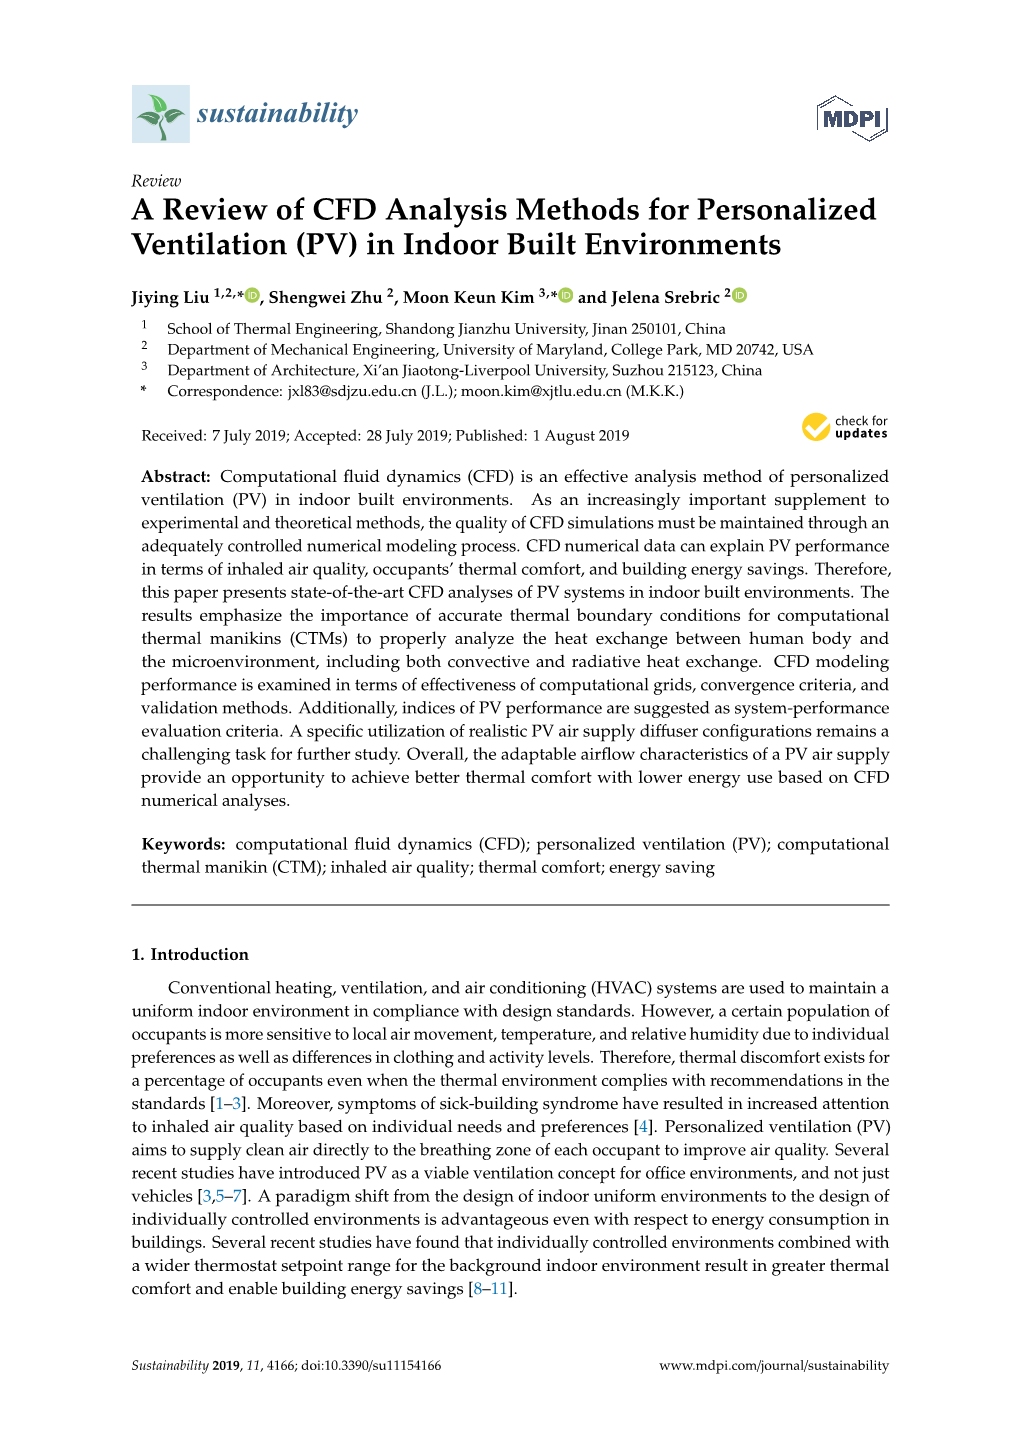 A Review of CFD Analysis Methods for Personalized Ventilation (PV) in Indoor Built Environments